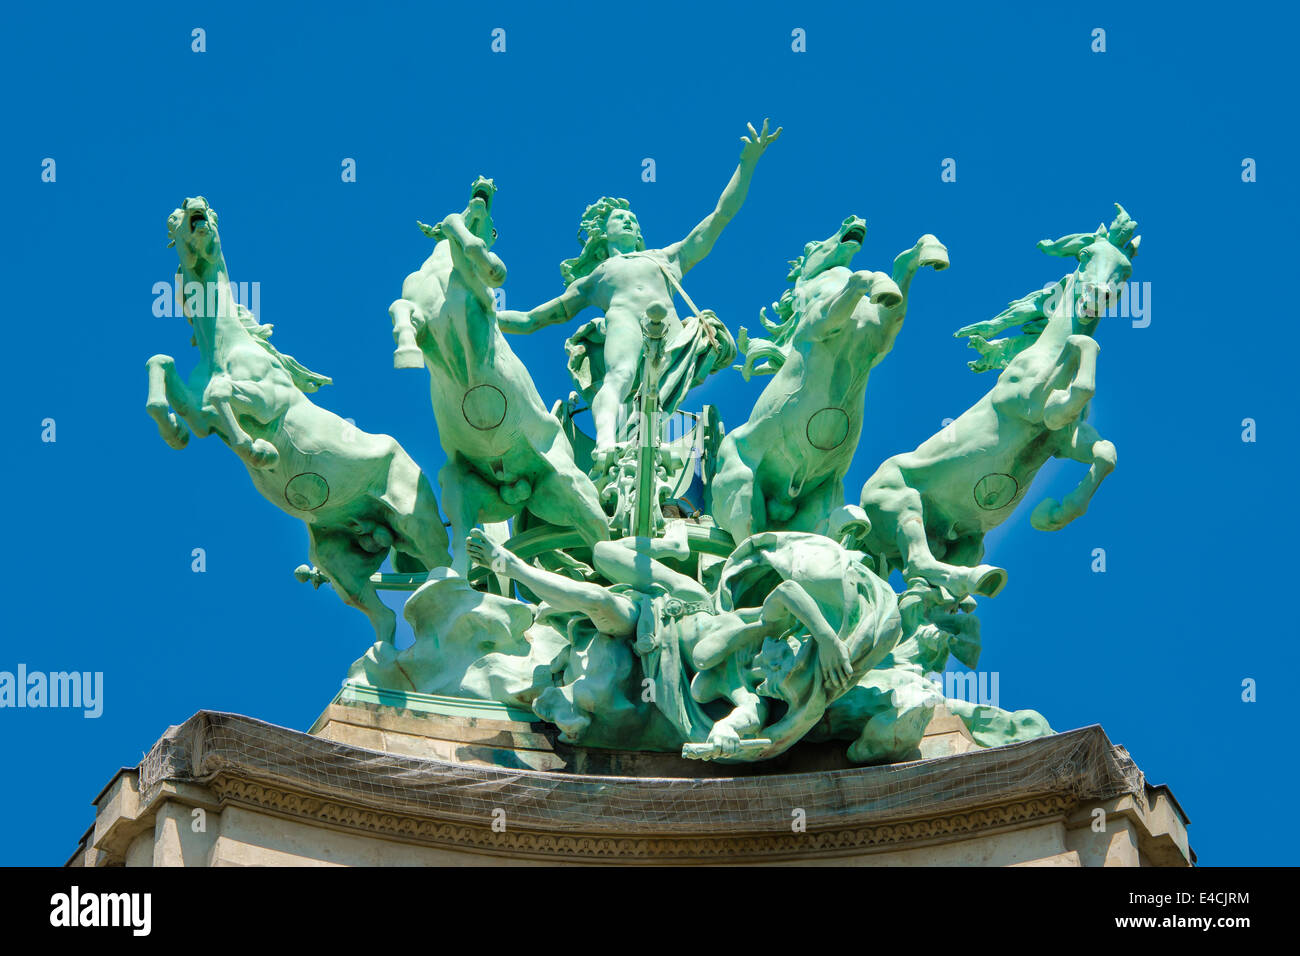 France, Paris: famous monuments statue of Grand Palais; blue sky and green bronze horses jumping from the palace roof. Stock Photo